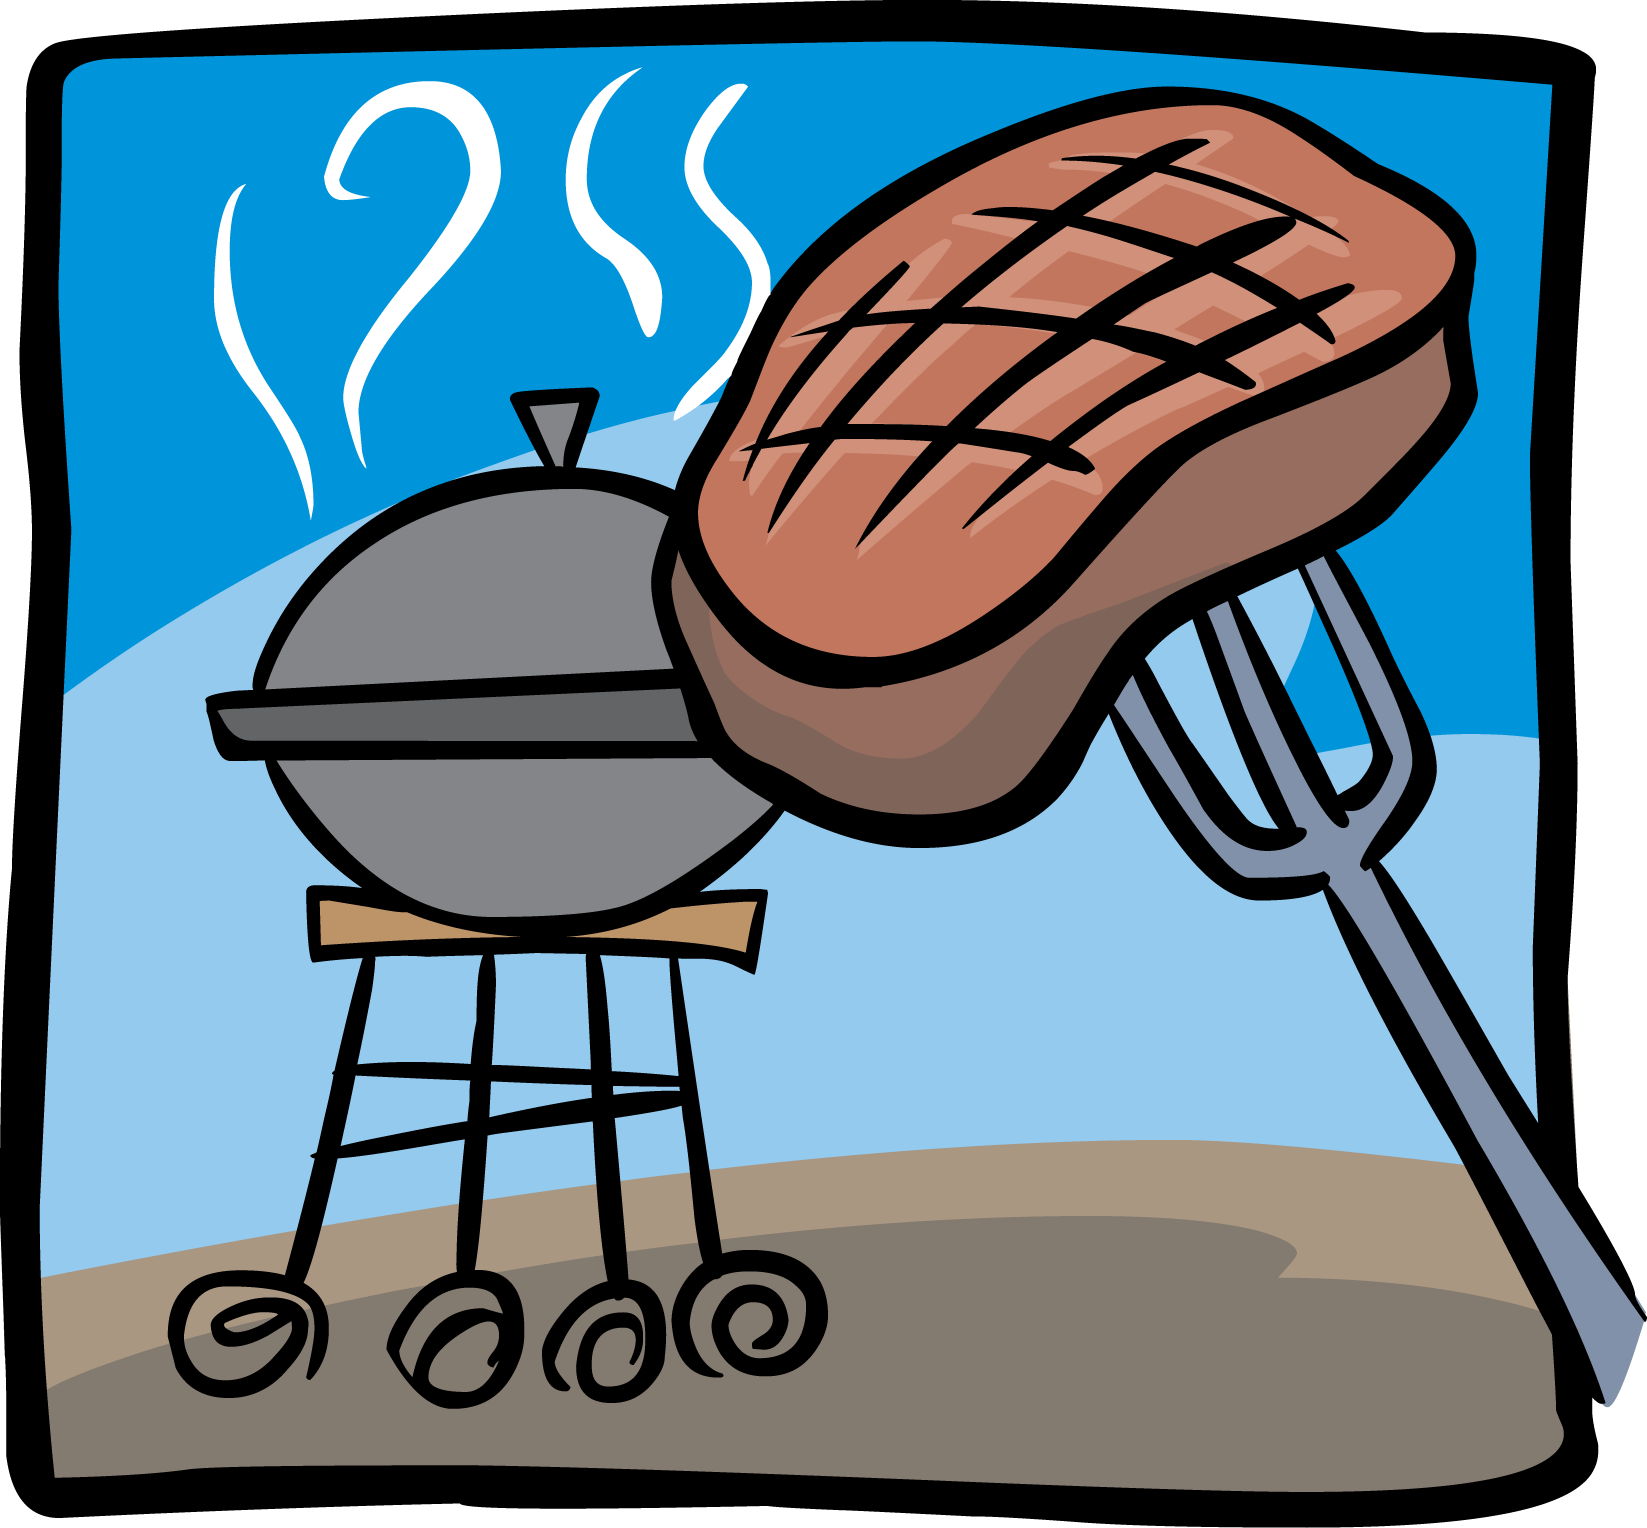 Free dinner cliparts download. Barbecue clipart barbecue meat